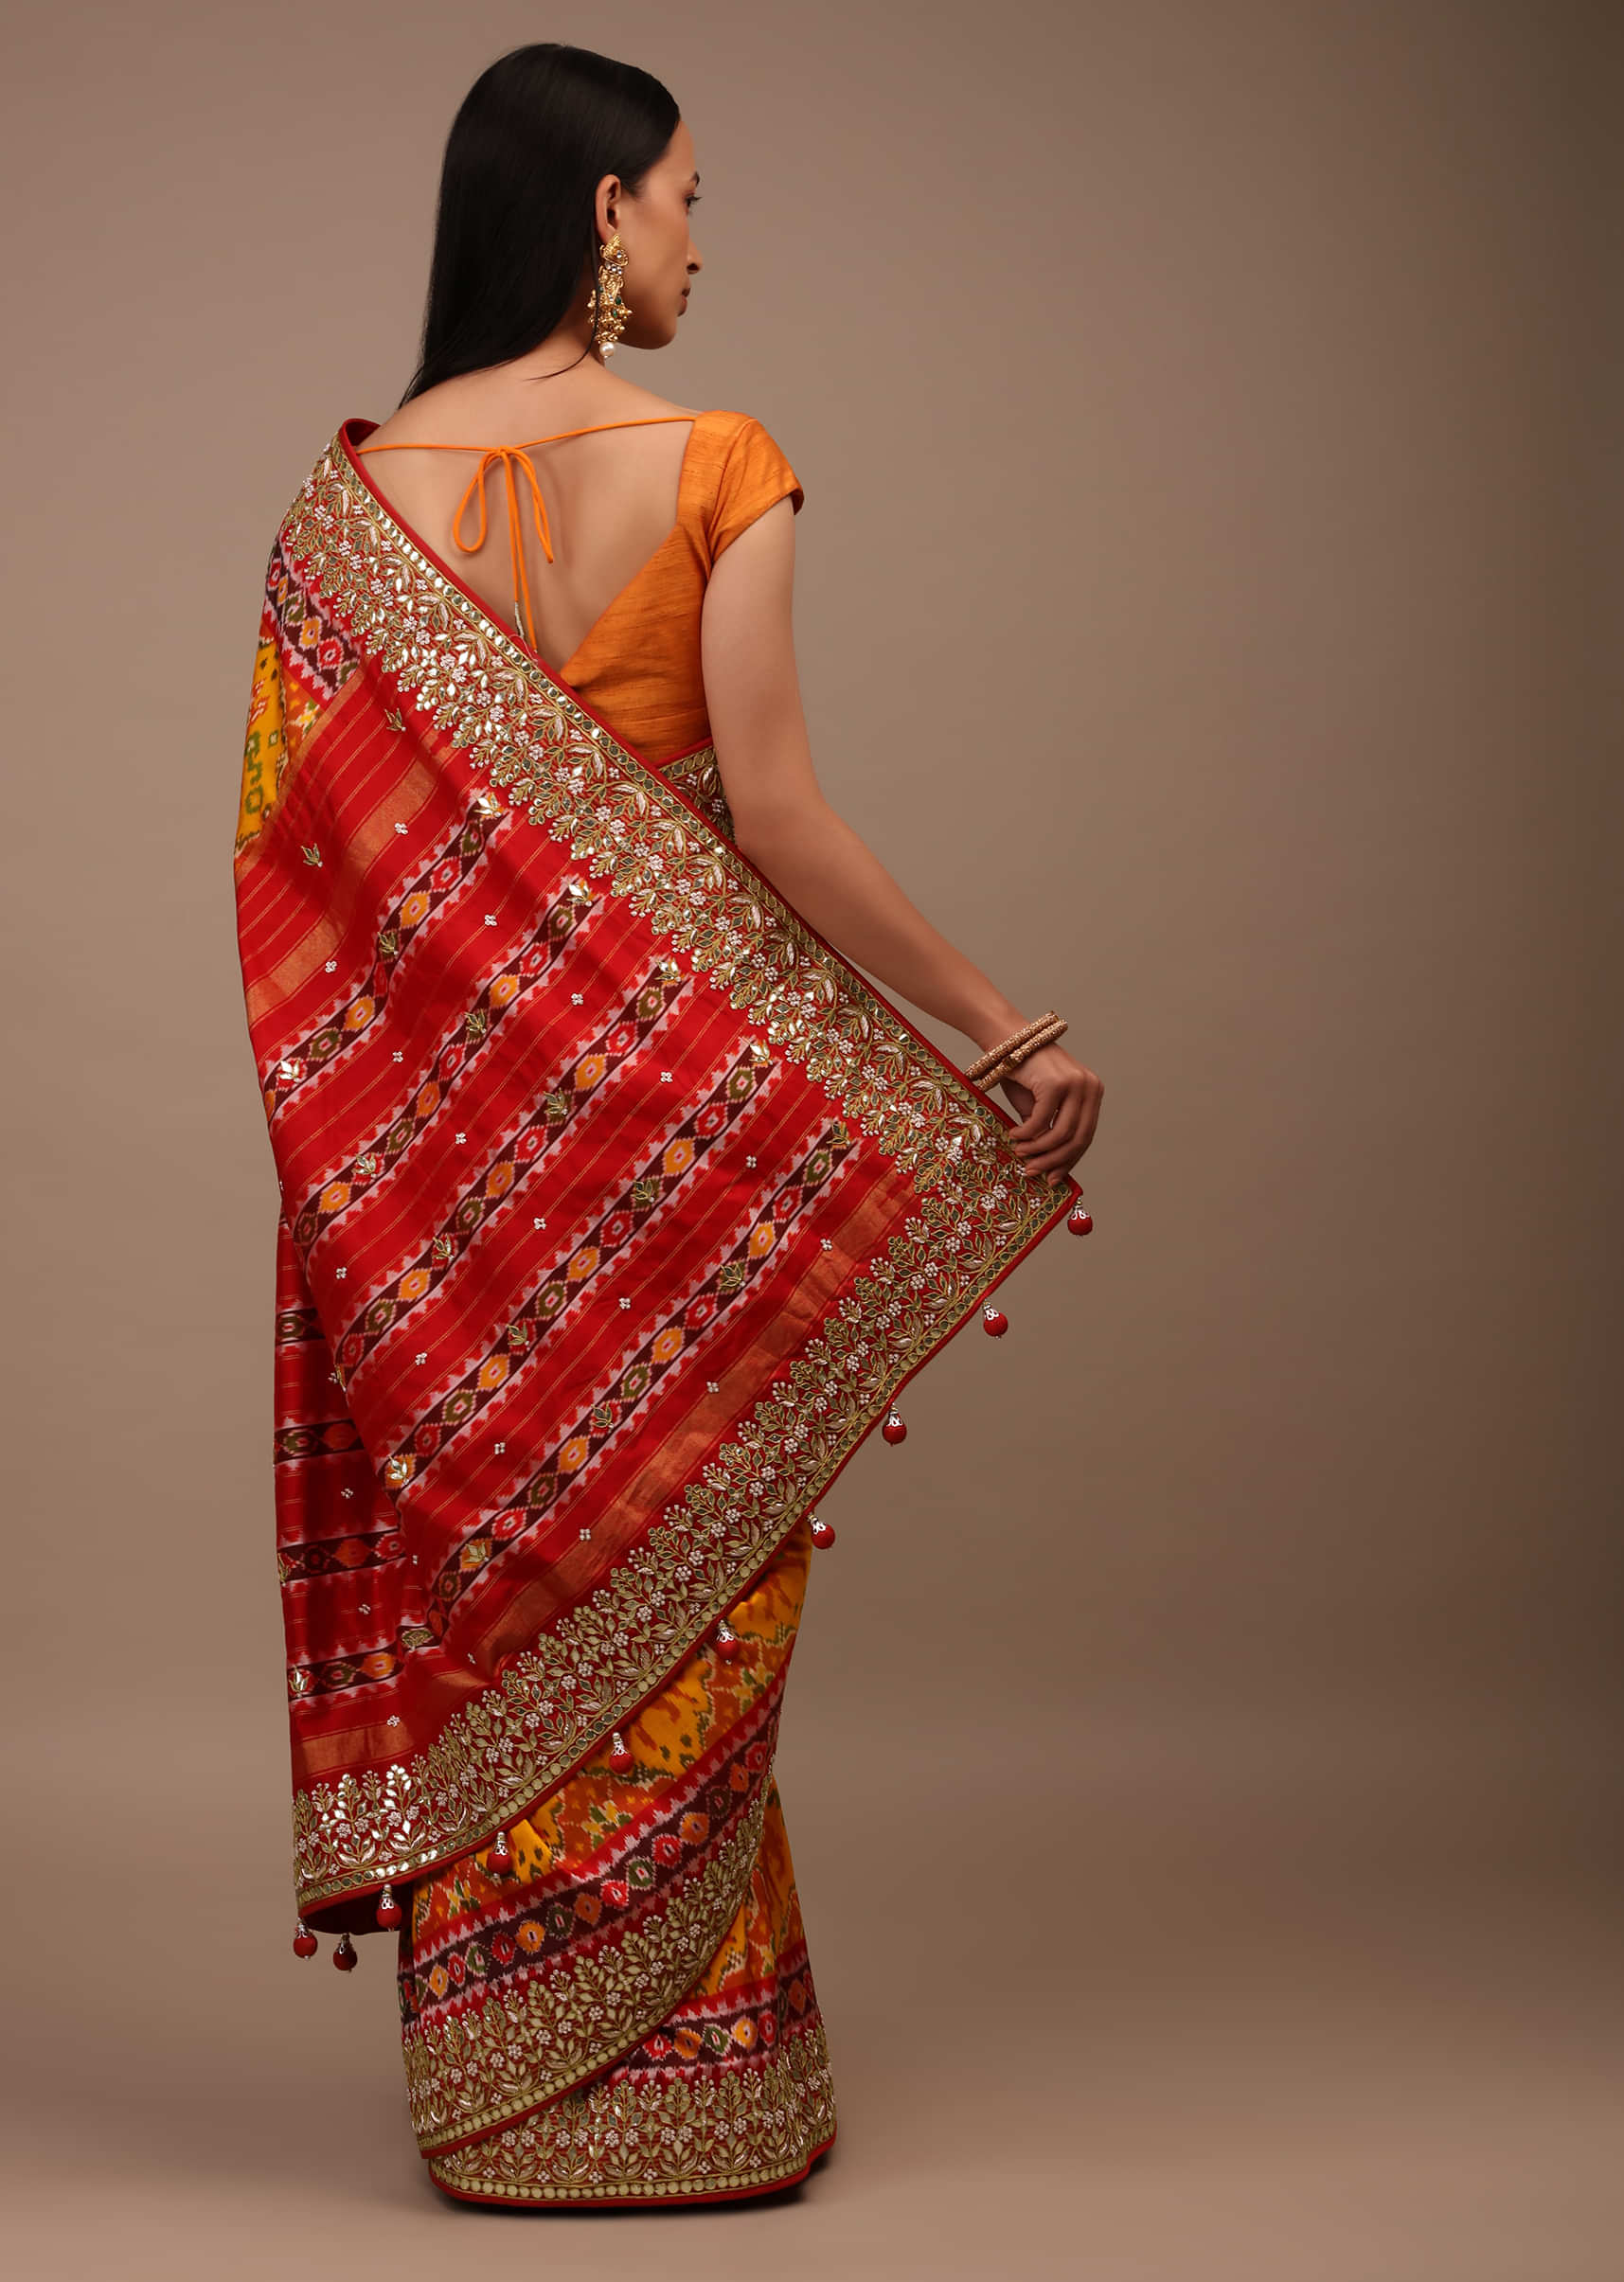 Mustard Yellow Saree In Silk With Pure Patola Weave And Gotta Patti Embroidered Border